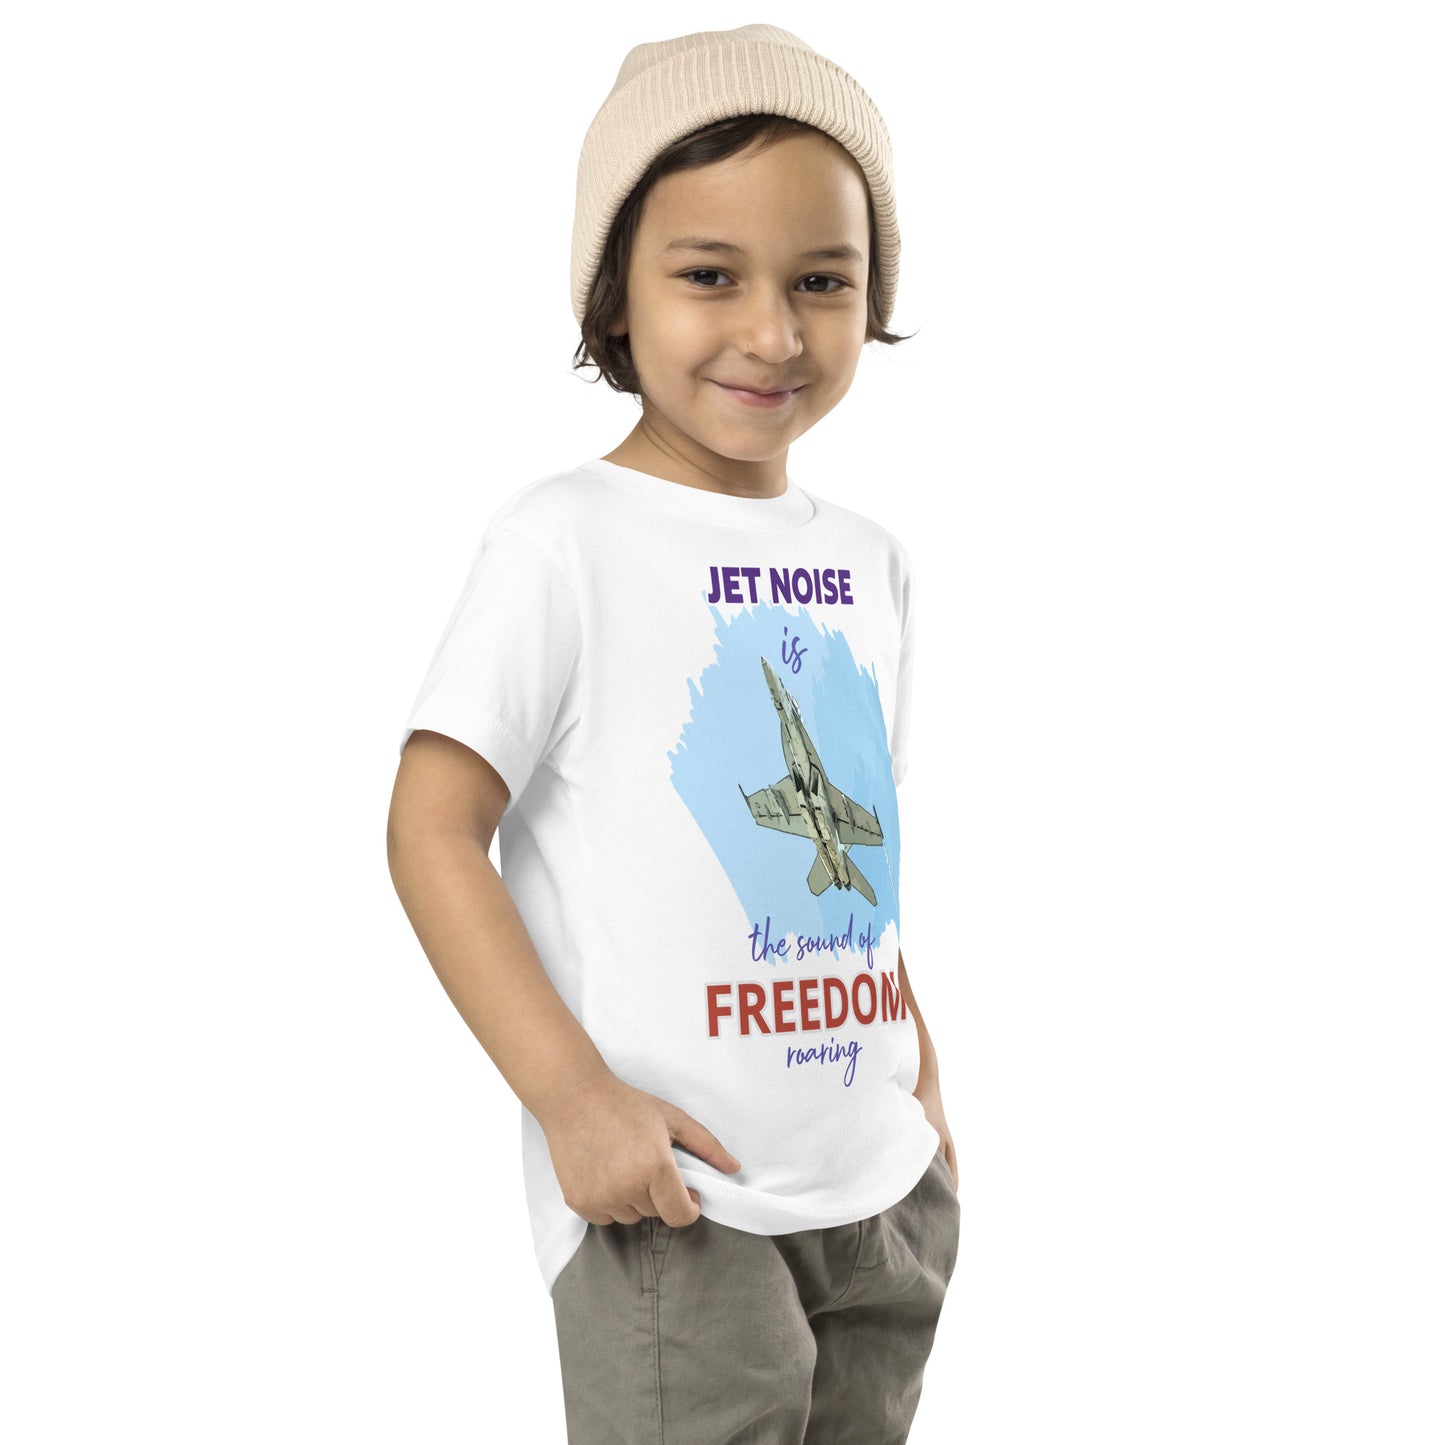 side view of boy wearing the jet noise t-shirt